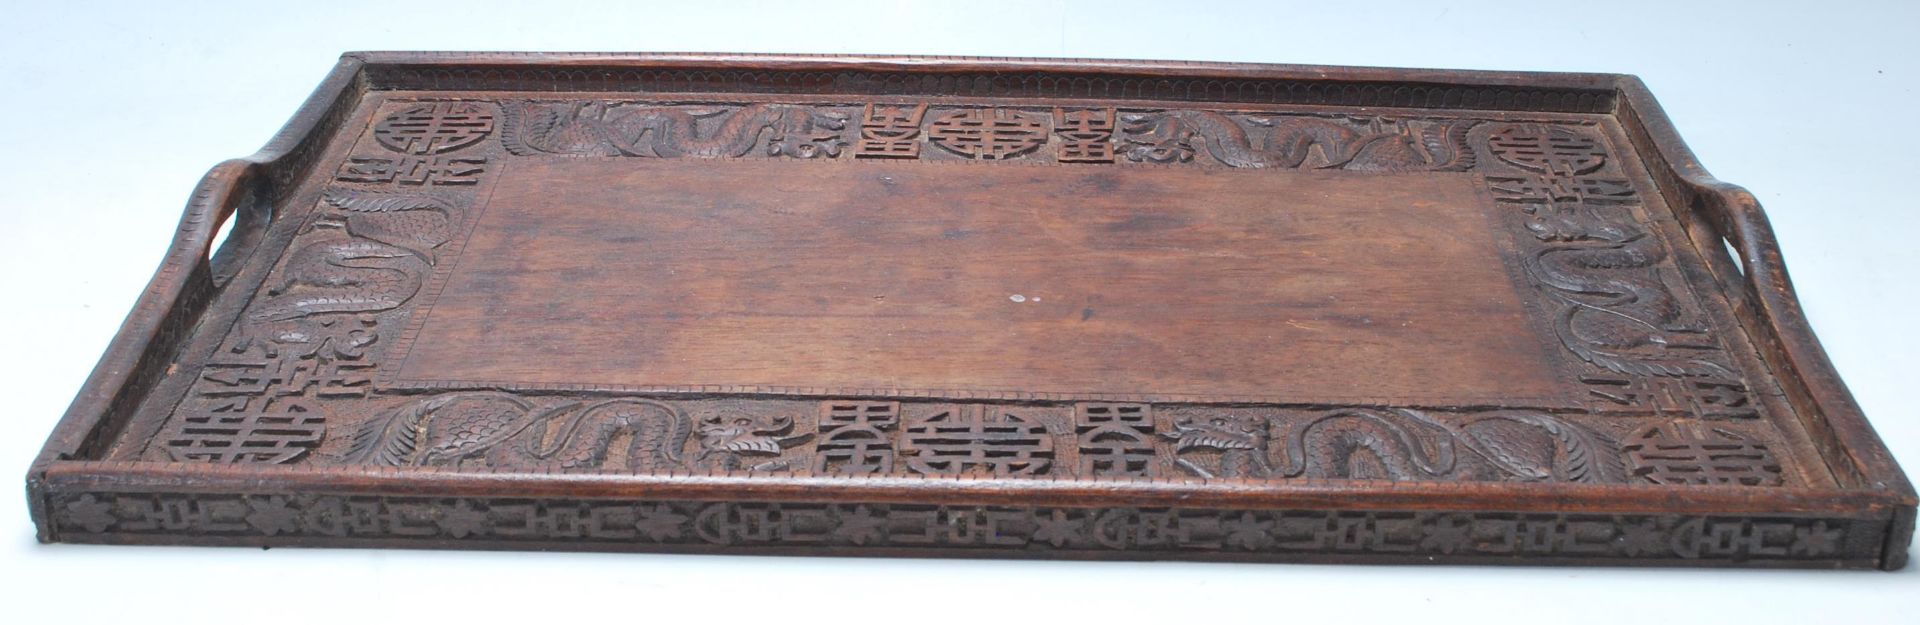 An early 20th Century Chinese Qing Dynasty style carved hardwood rice wine serving tray decorated